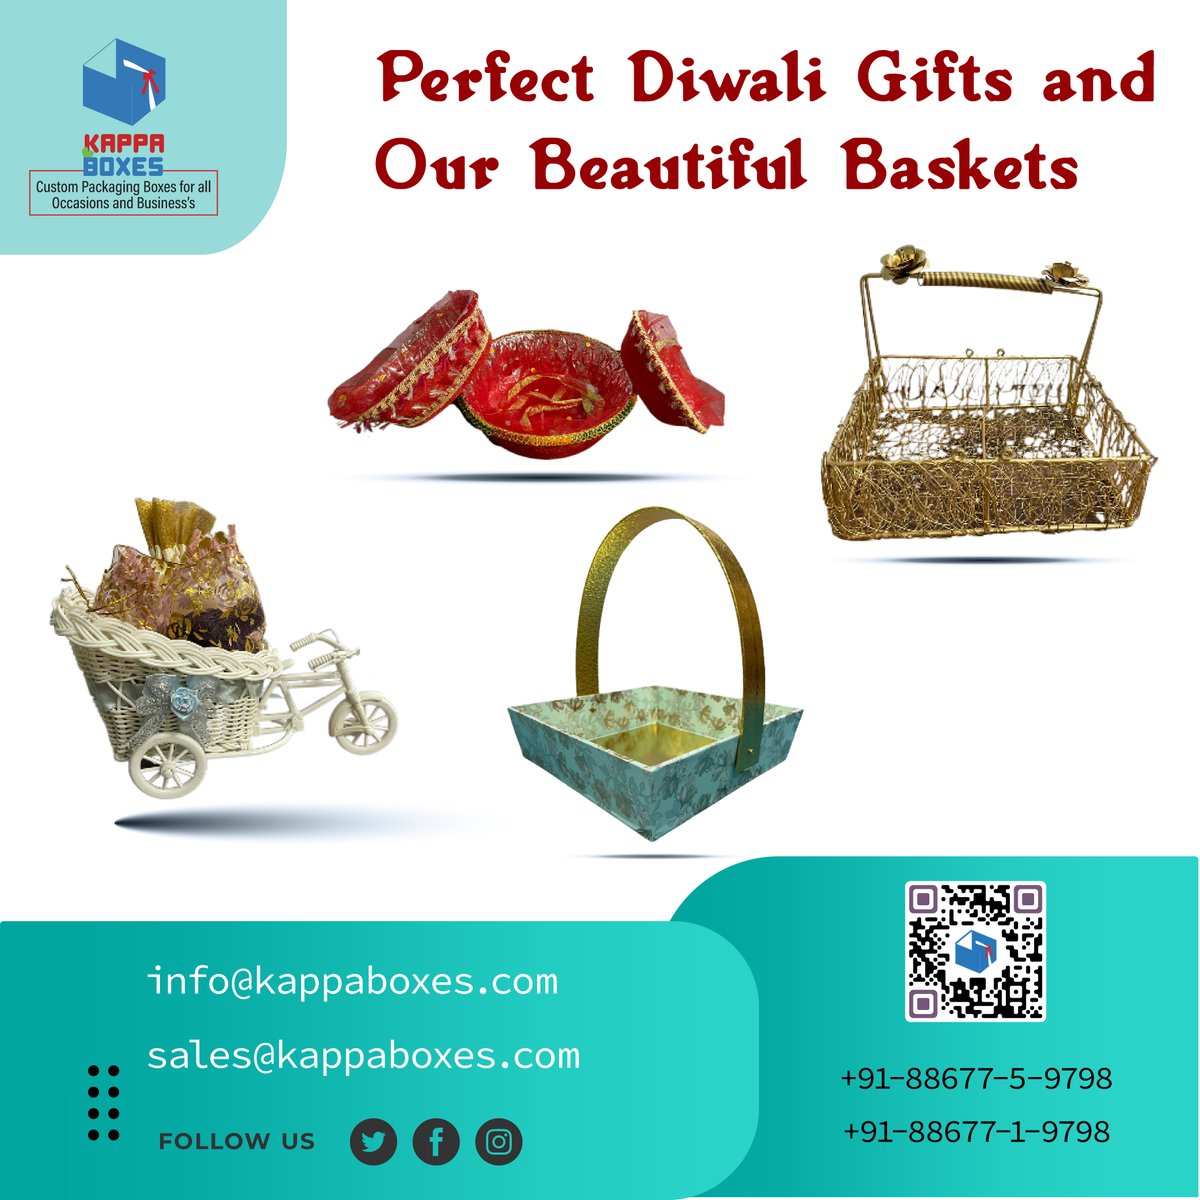 Our Diwali Celebration Basket is brimming with festive delights, perfect for sharing joy and love during the Festival of Lights.

#KappaBoxes  #rigidboxes #ecofriendly #sustainable #CustomizedBoxes #monocartons #labelsandstickers #carrybags